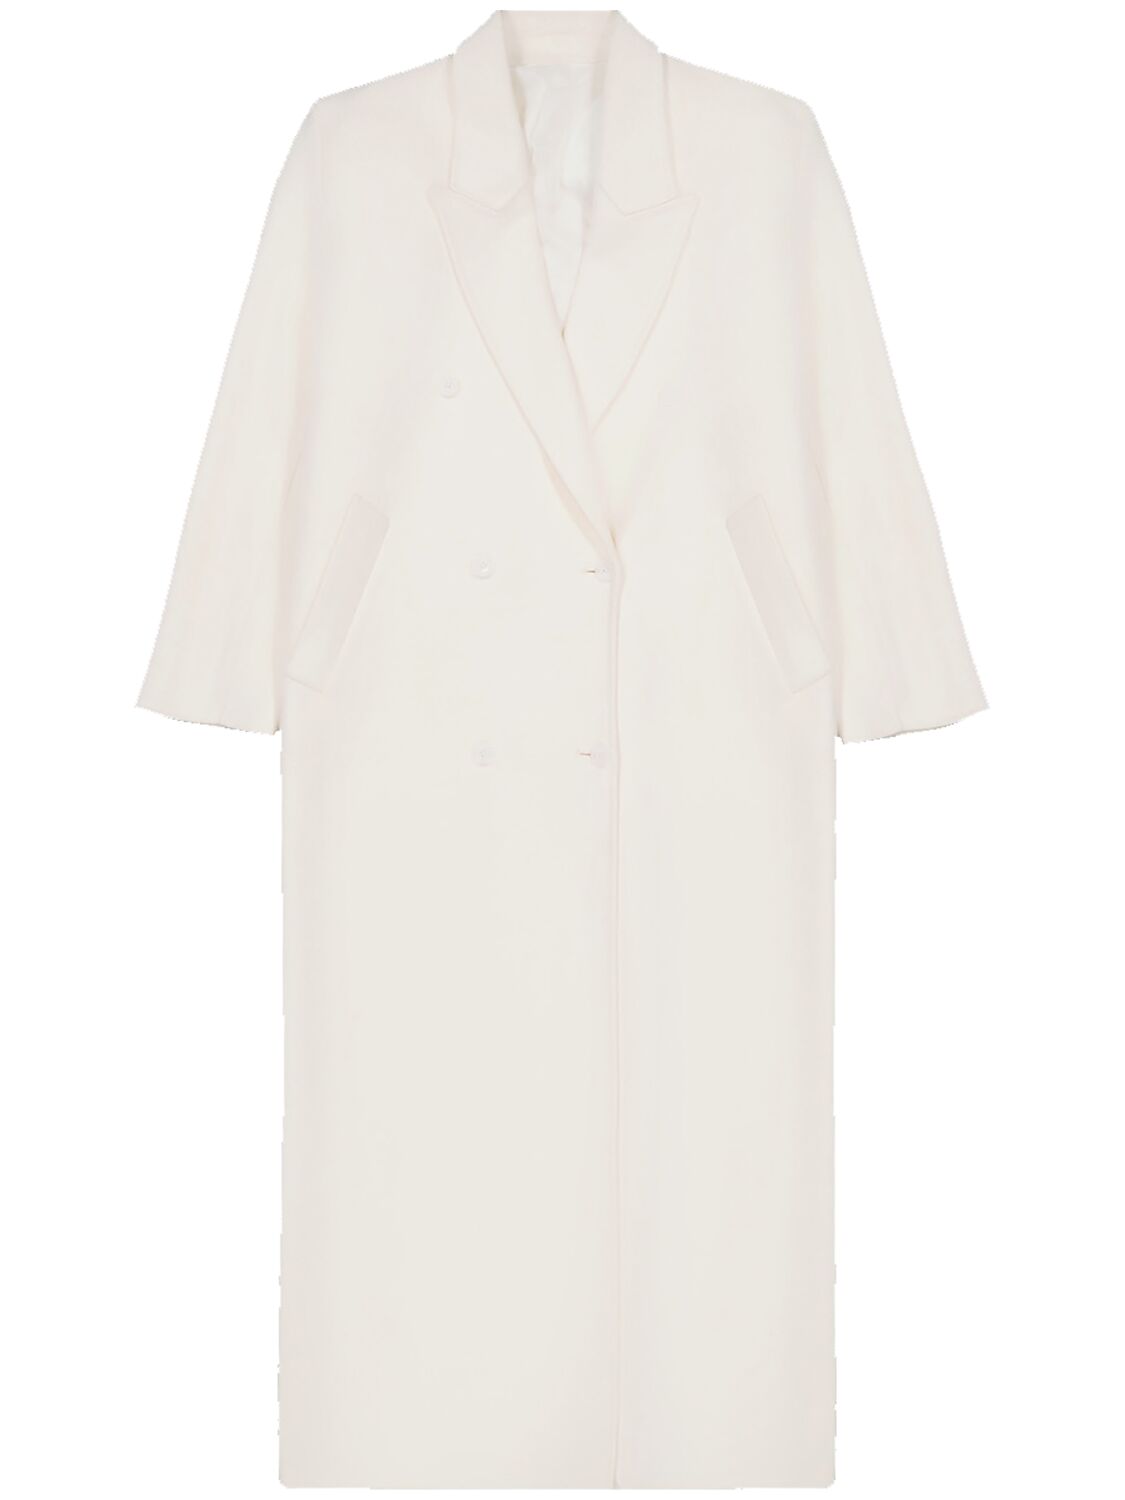 The Frankie Shop Gaia Double Breasted Wool Long Coat In White